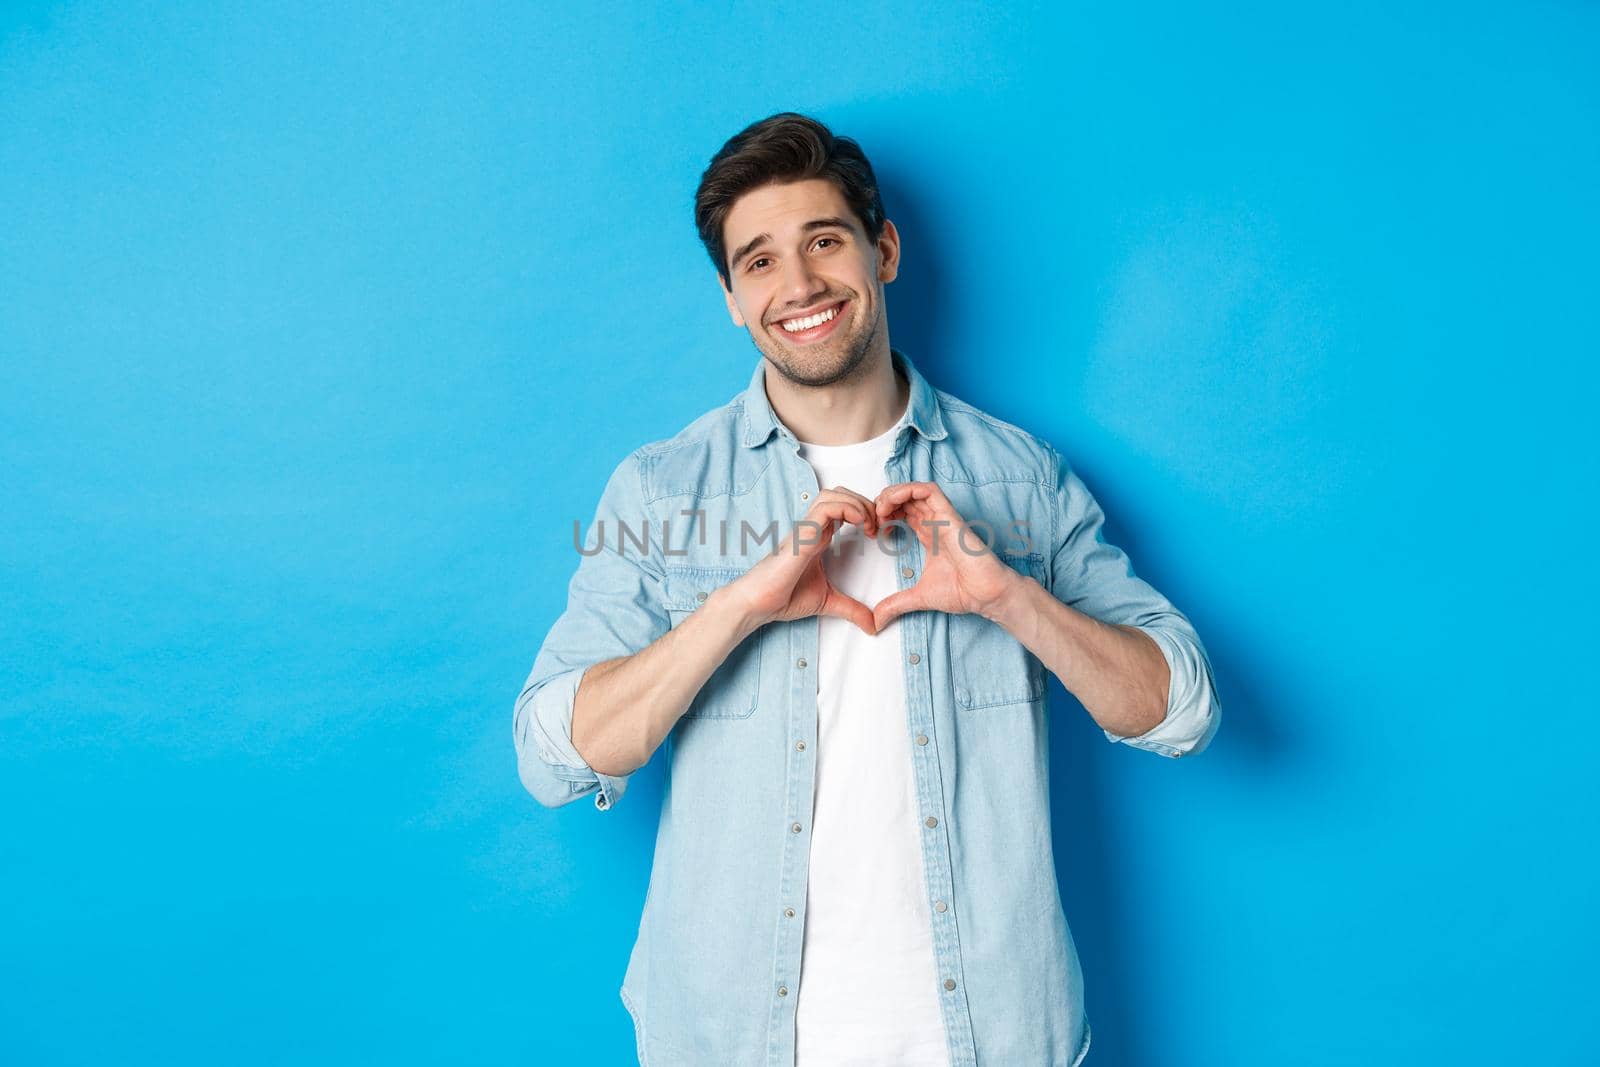 Handsome man smiling, showing heart gesture and looking at camera, saying I love you, standing against blue background.